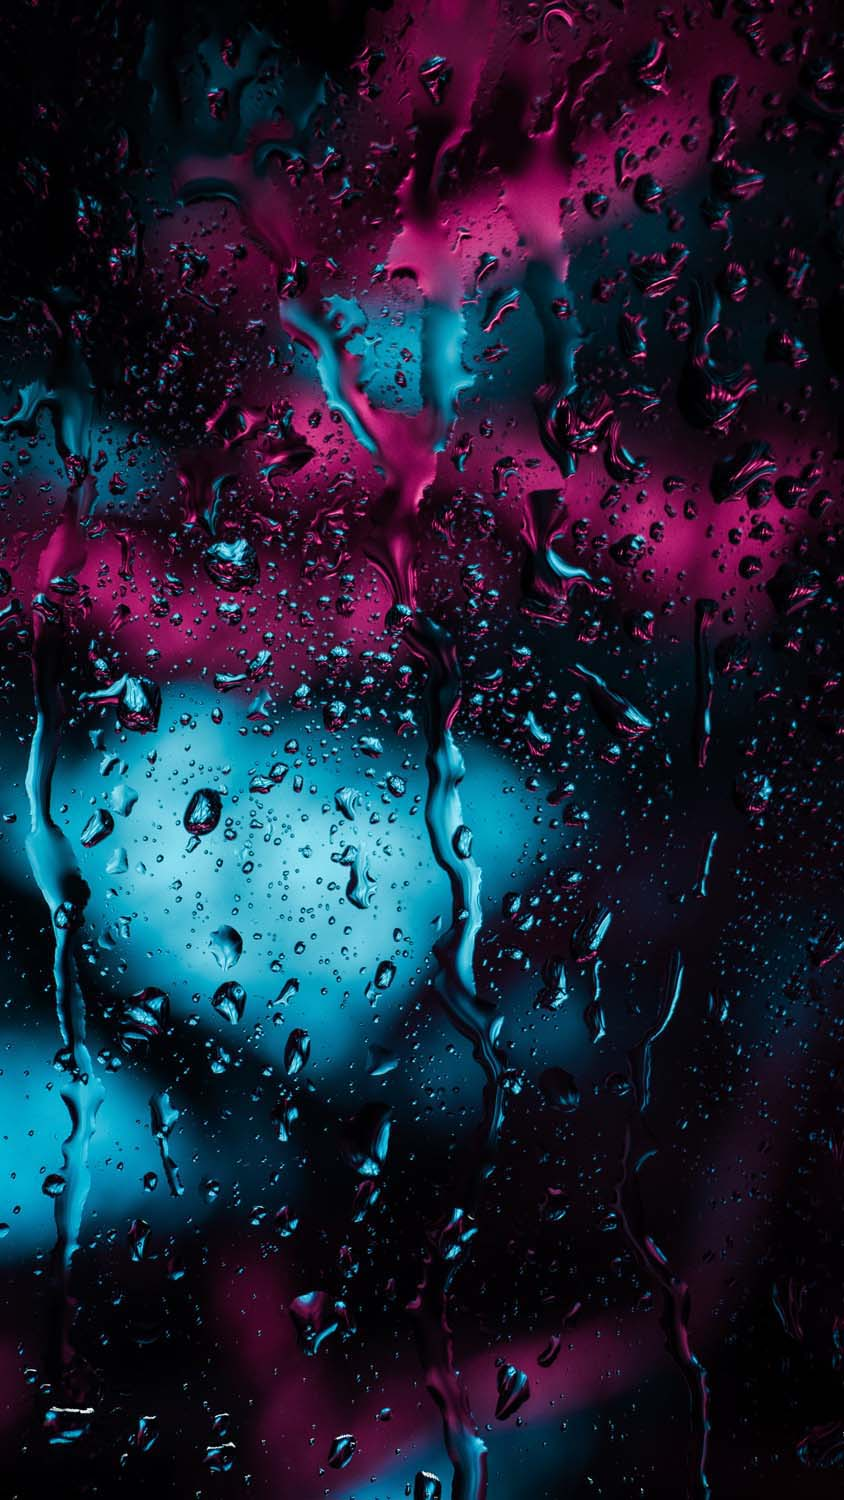 Water Droplets IPhone Wallpaper HD  IPhone Wallpapers